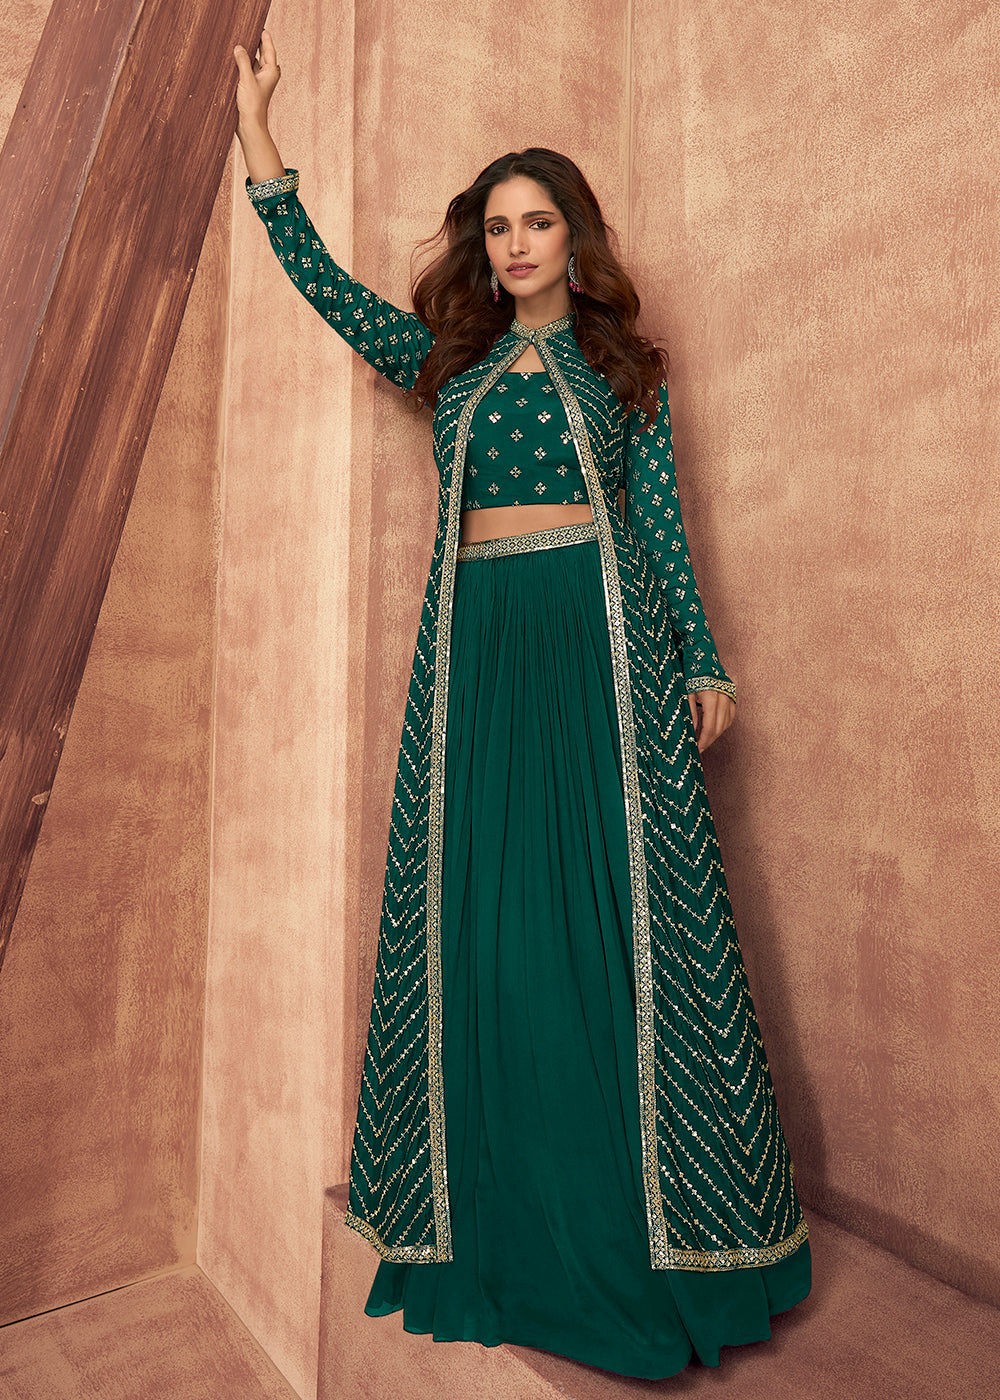 Shop Now Teal Green Dola Silk Party Wear Lehenga Choli with Jacket Online in USA, UK, Canada & Worldwide at Empress Clothing.